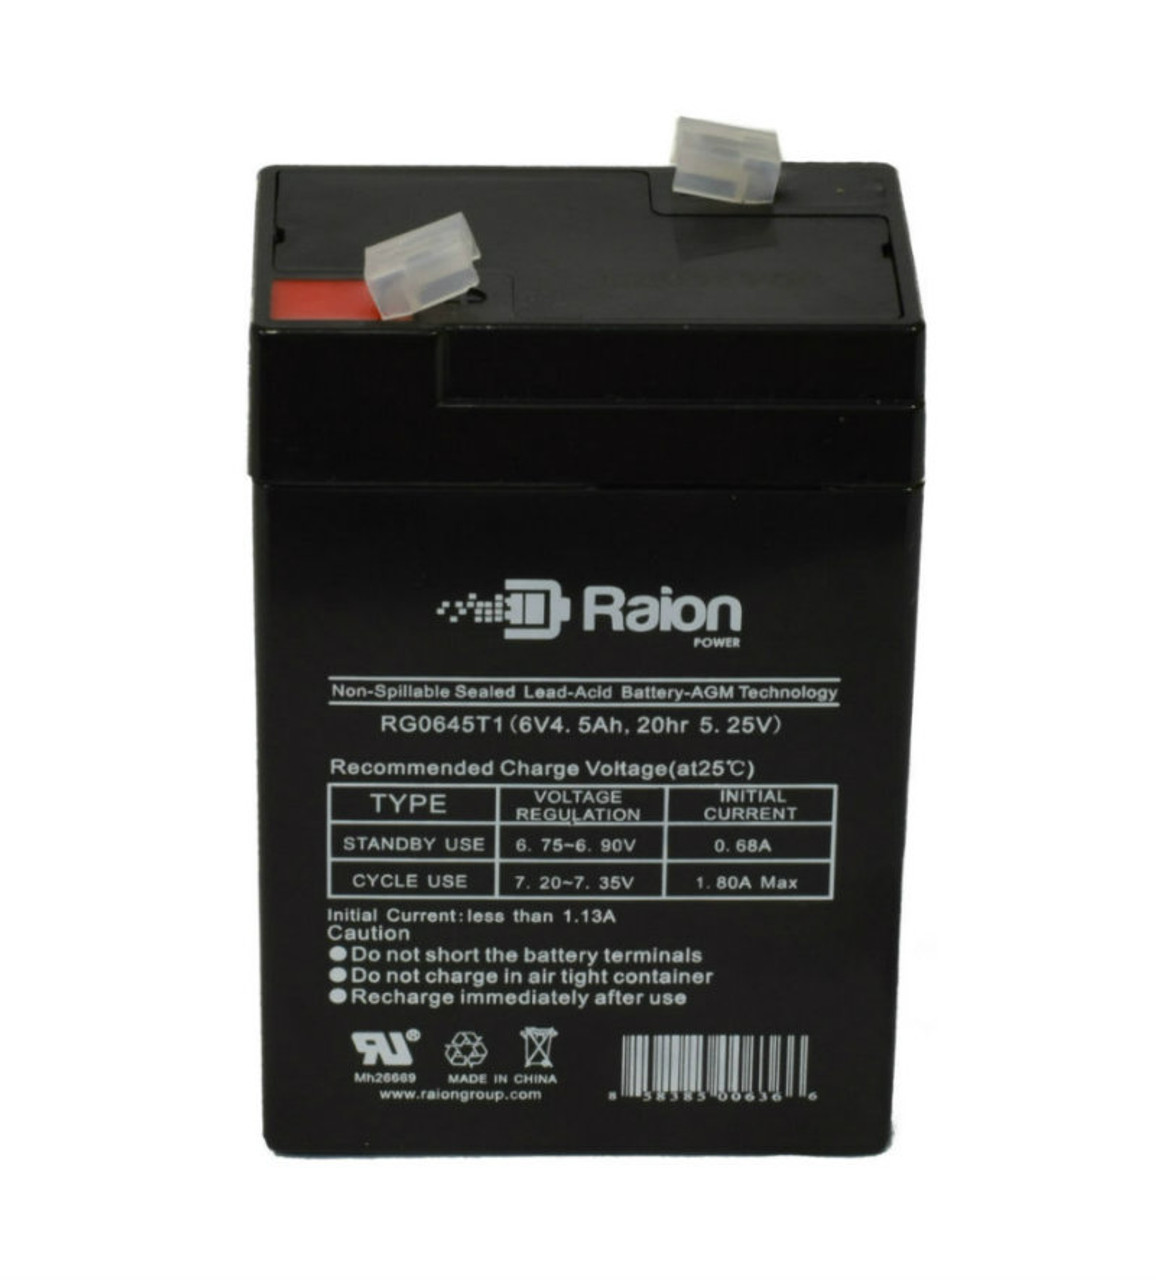 Raion Power RG0645T1 Replacement Battery Cartridge for JohnLite CY-0112